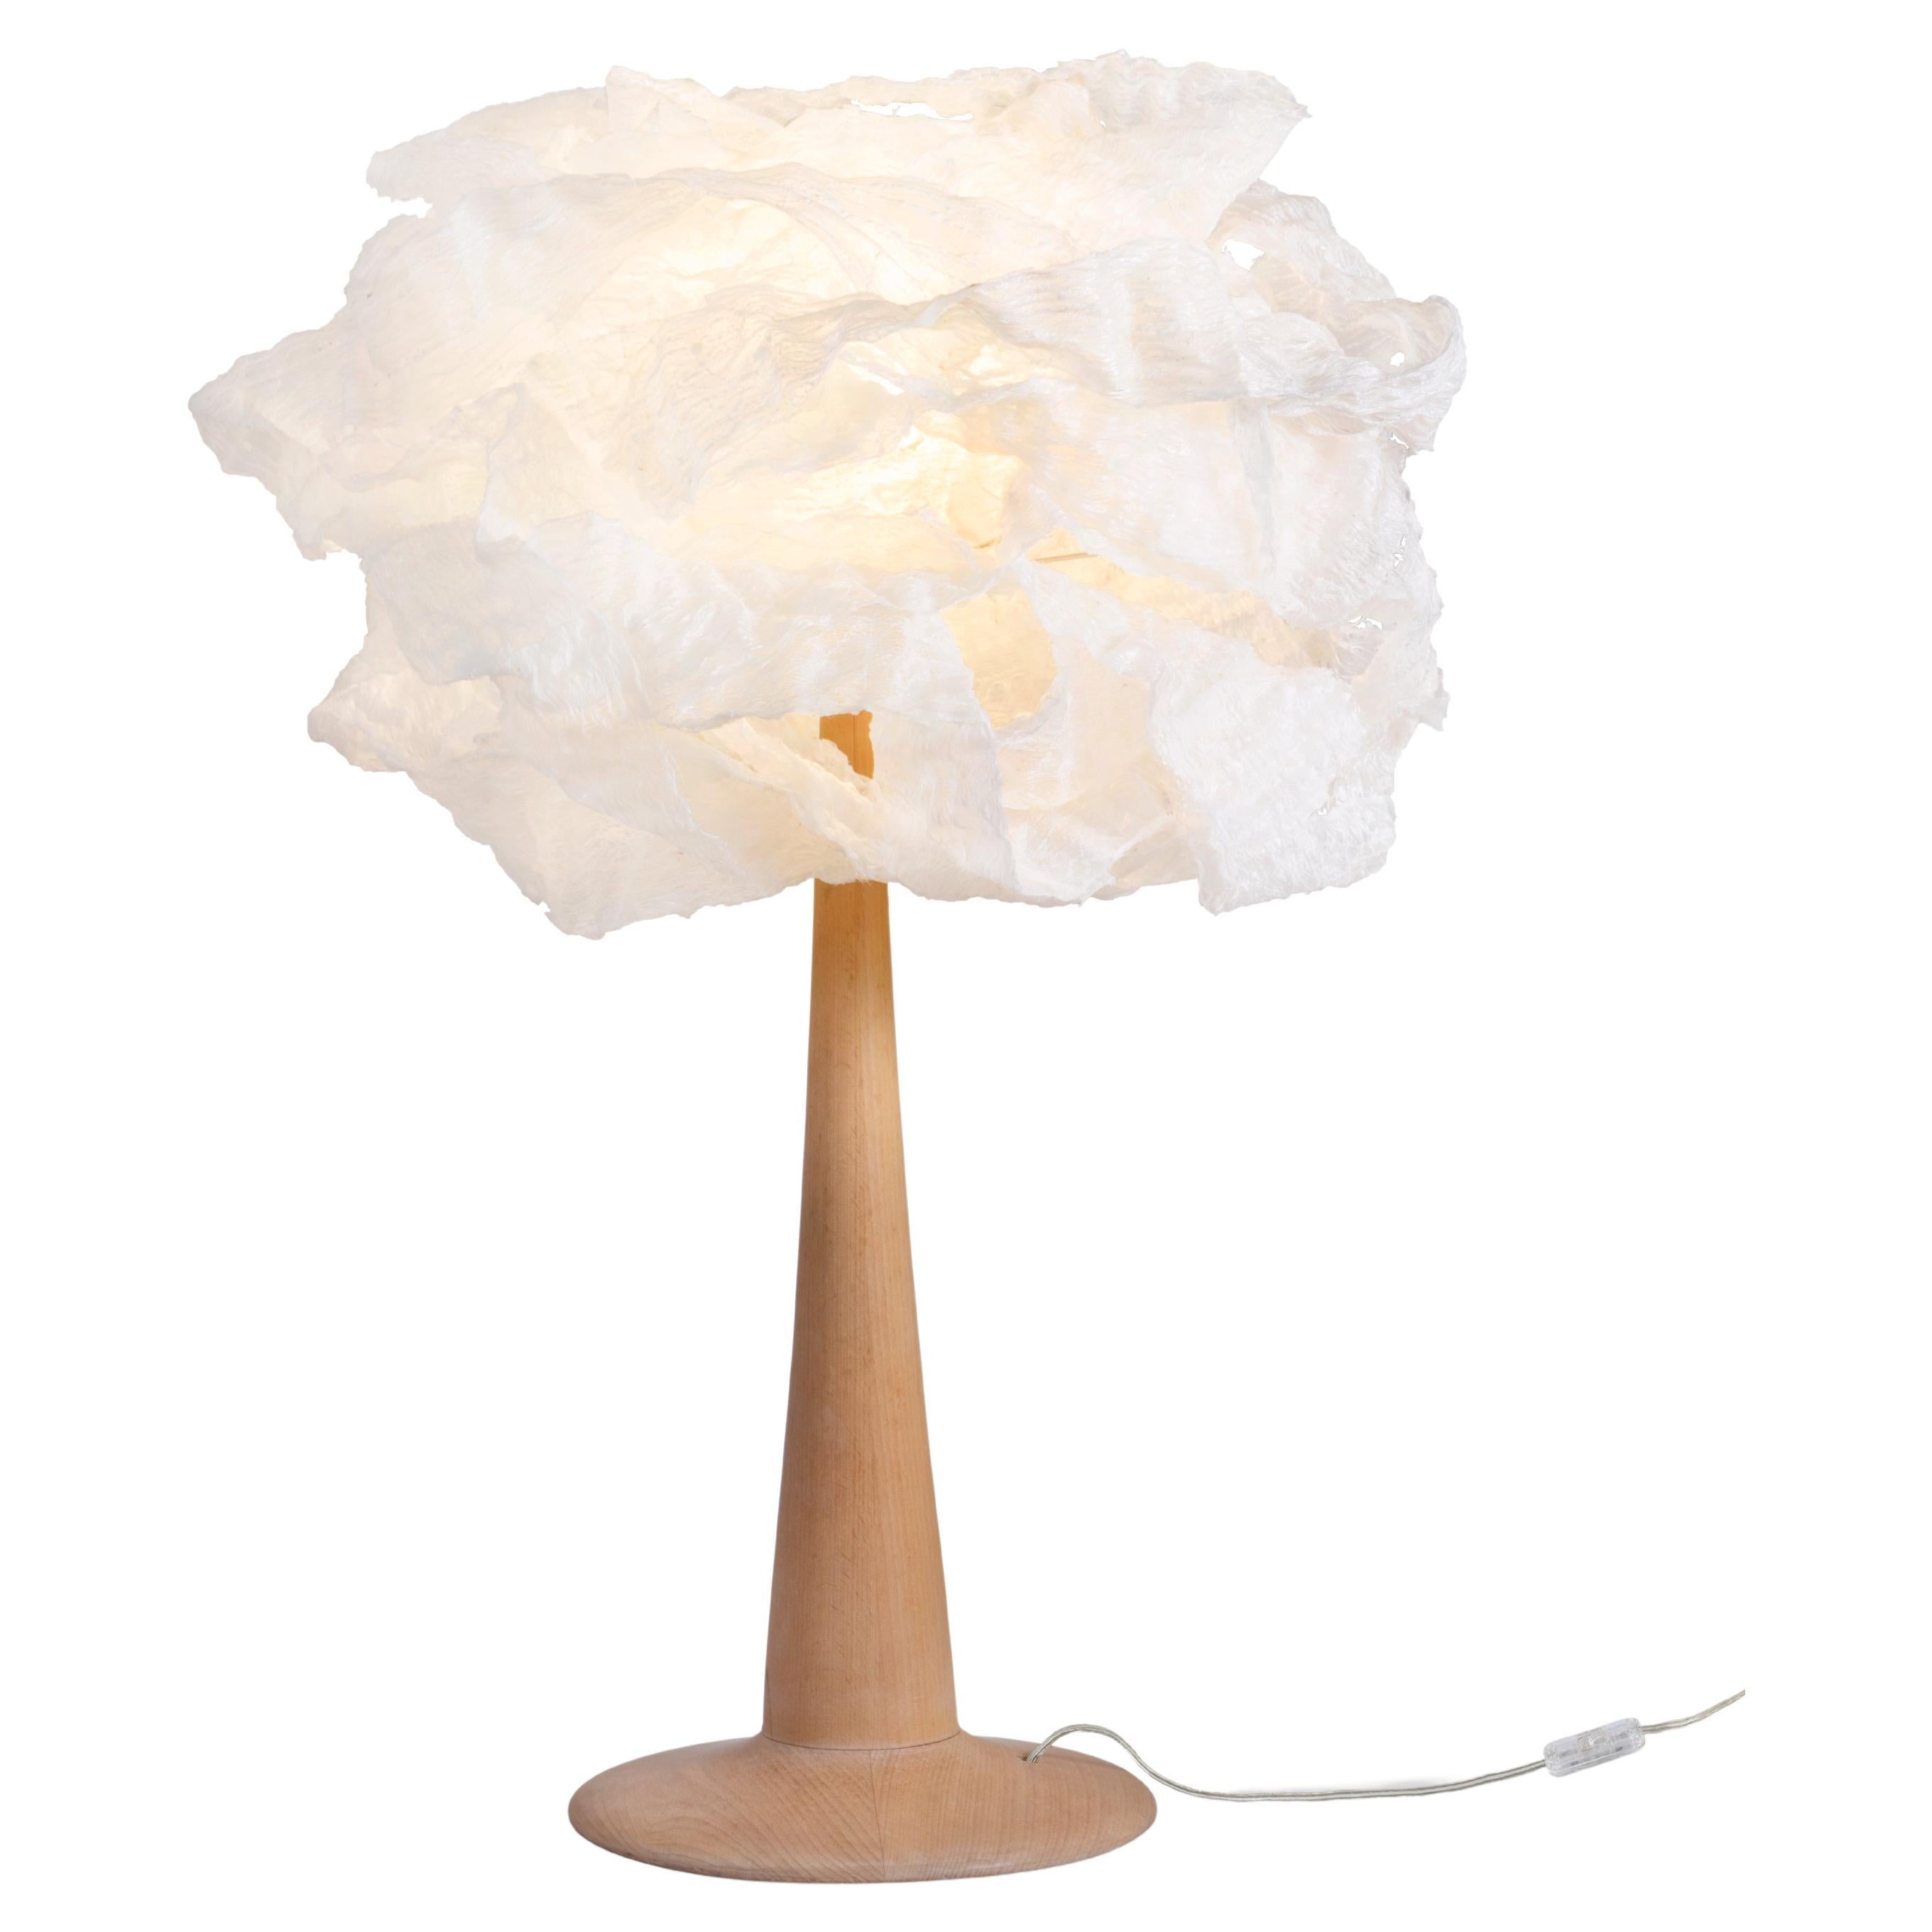 Transcendence table by Ango, Hand-Crafted Sculptural Table Lamp